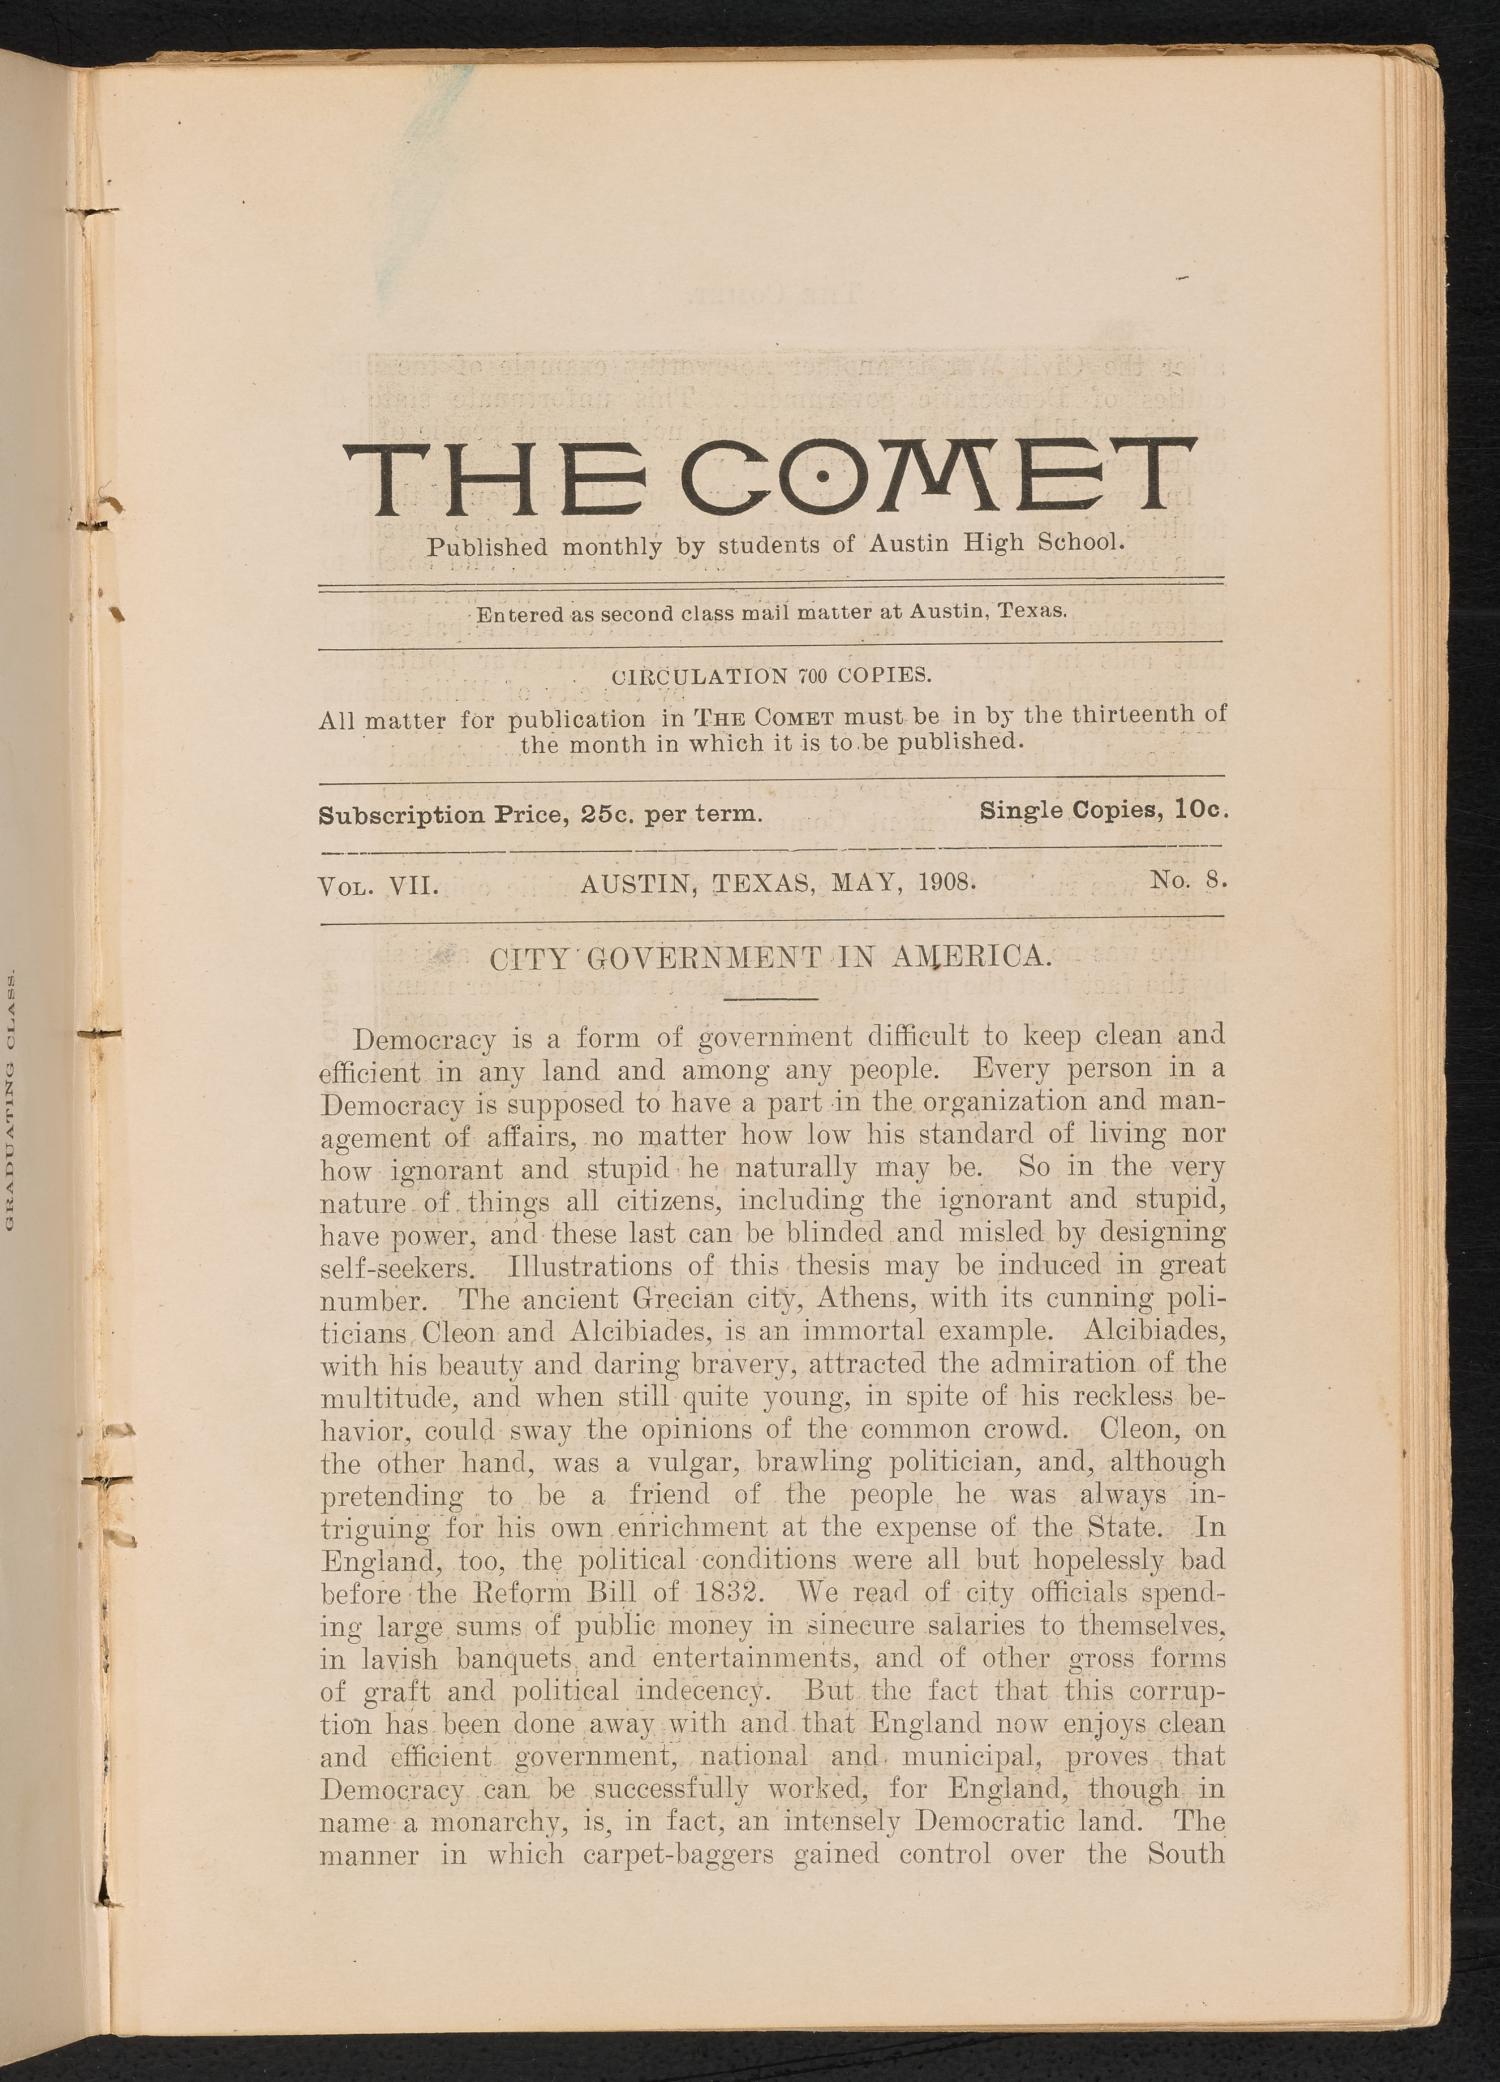 The Comet, Volume 7, Number 8, May 1908
                                                
                                                    1
                                                